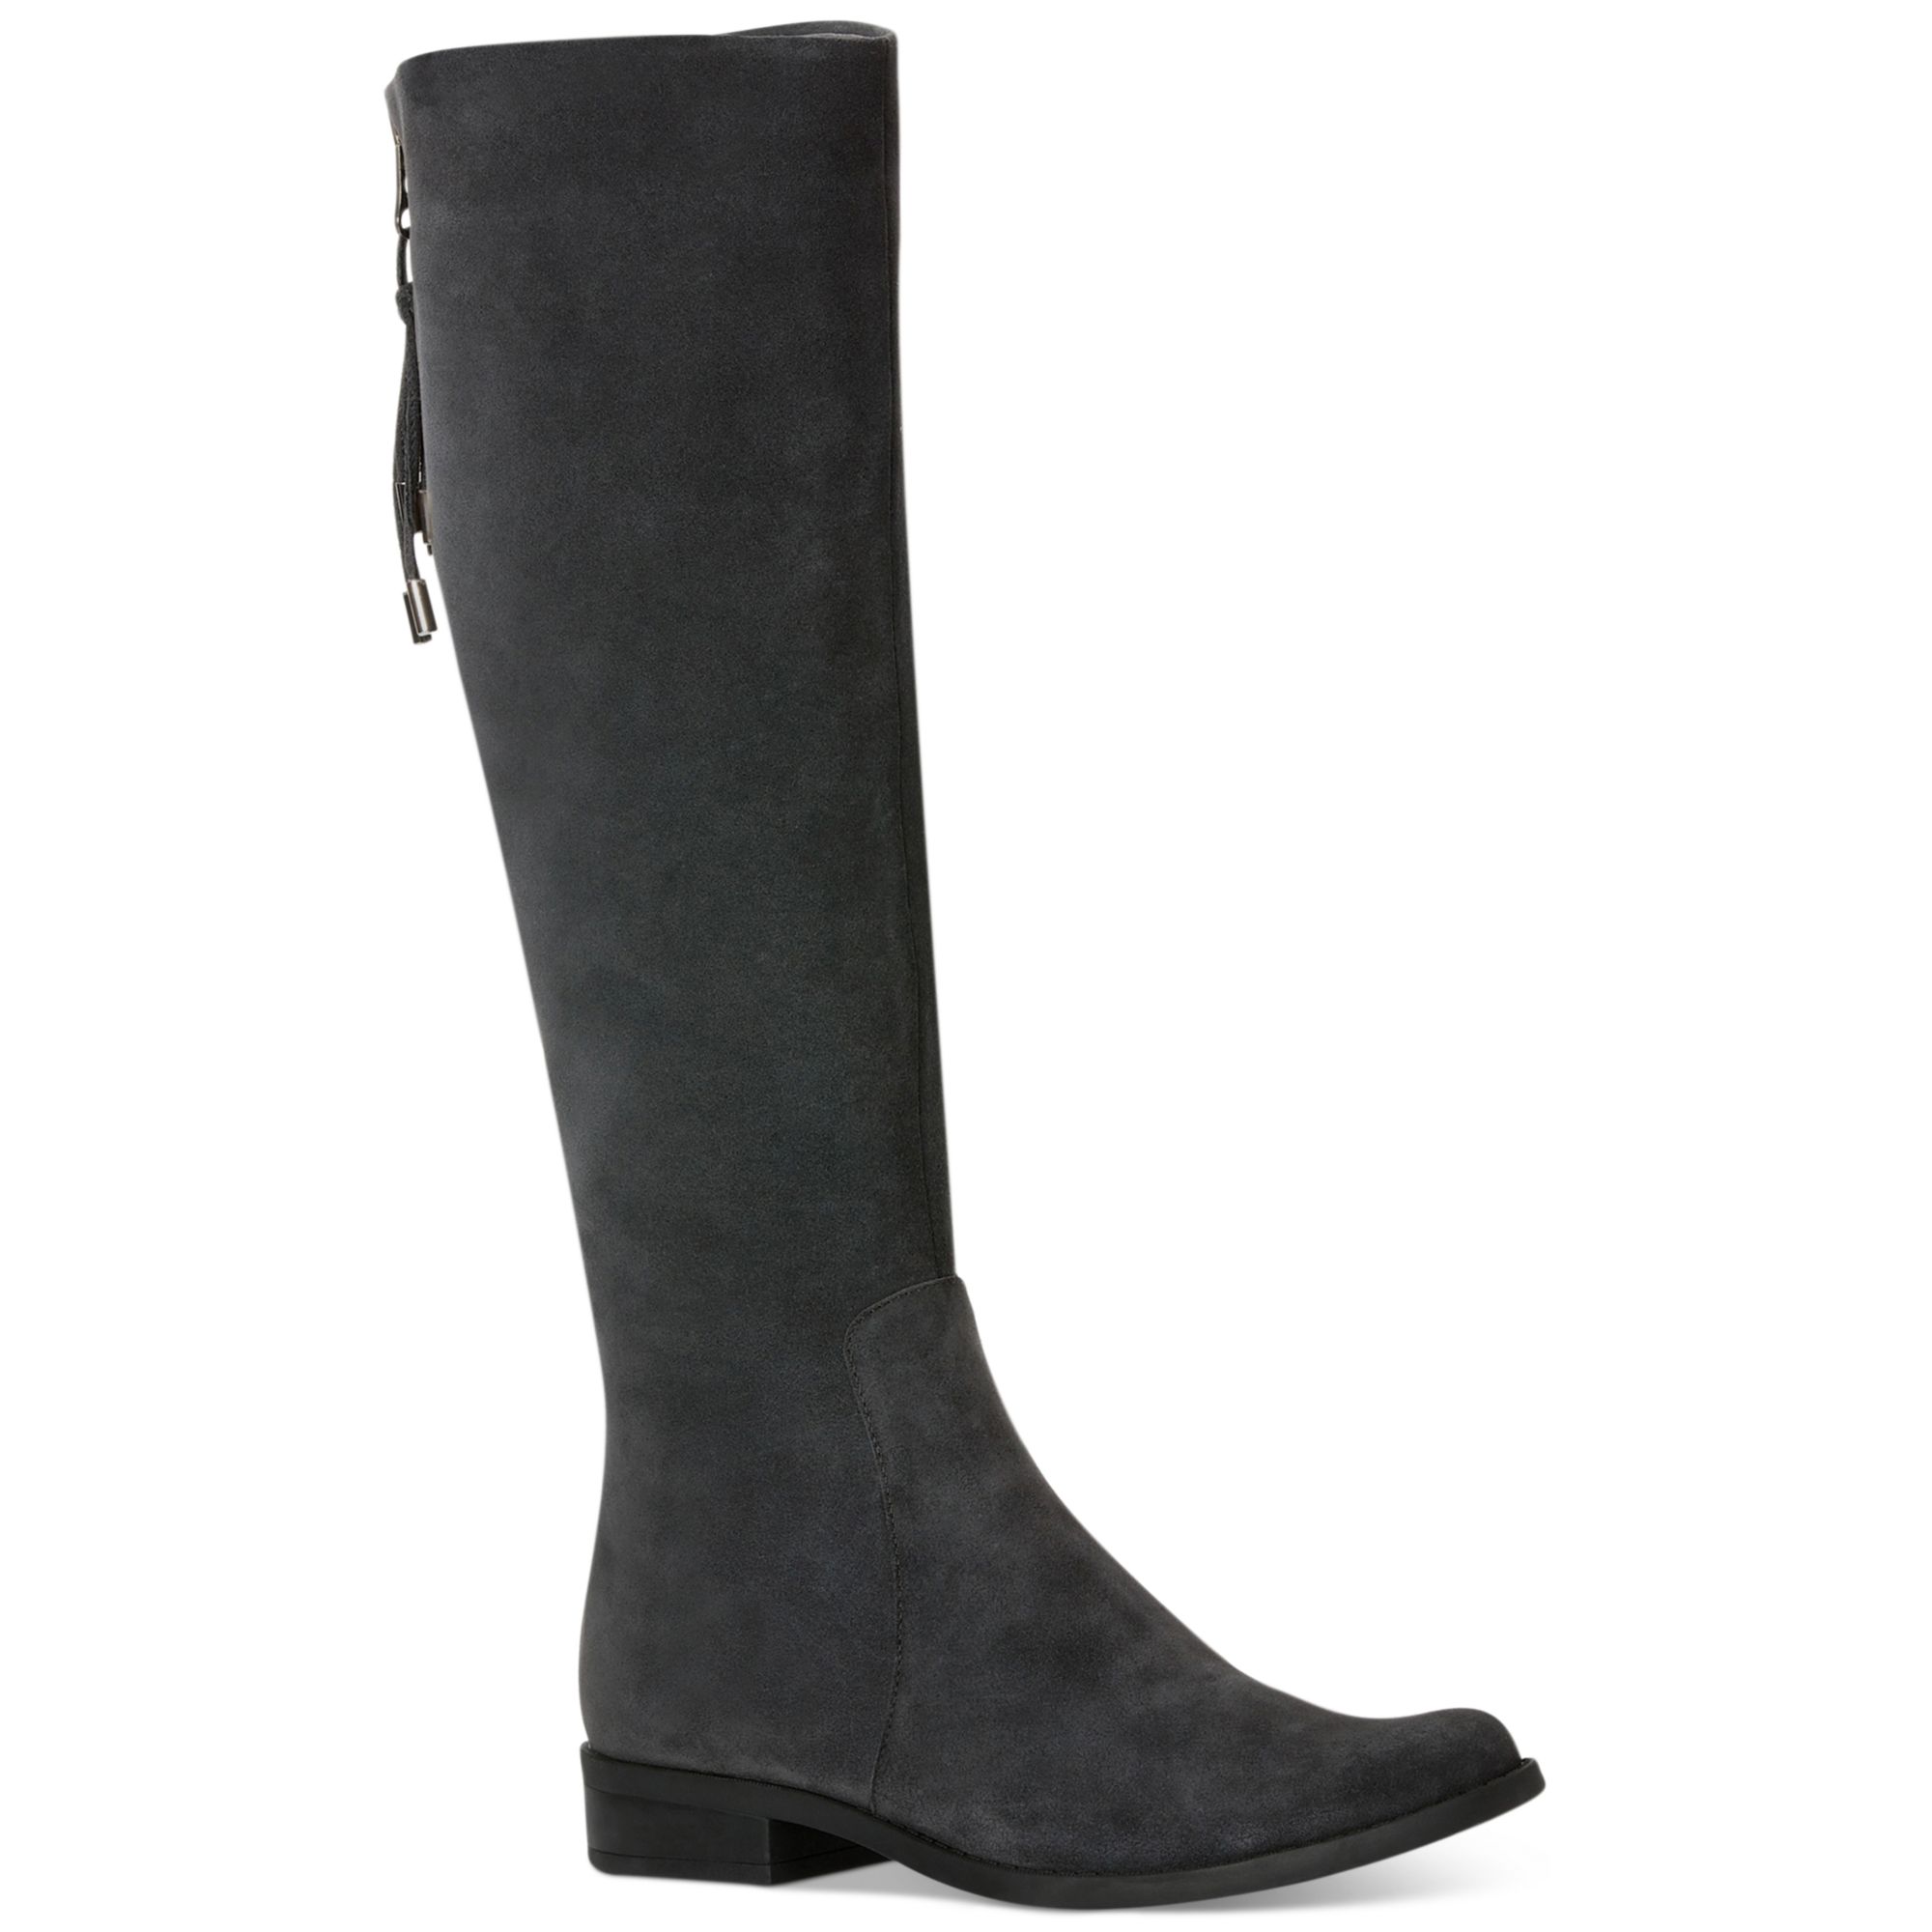 Lyst - Calvin Klein Taylin Wide Calf Riding Boots in Gray